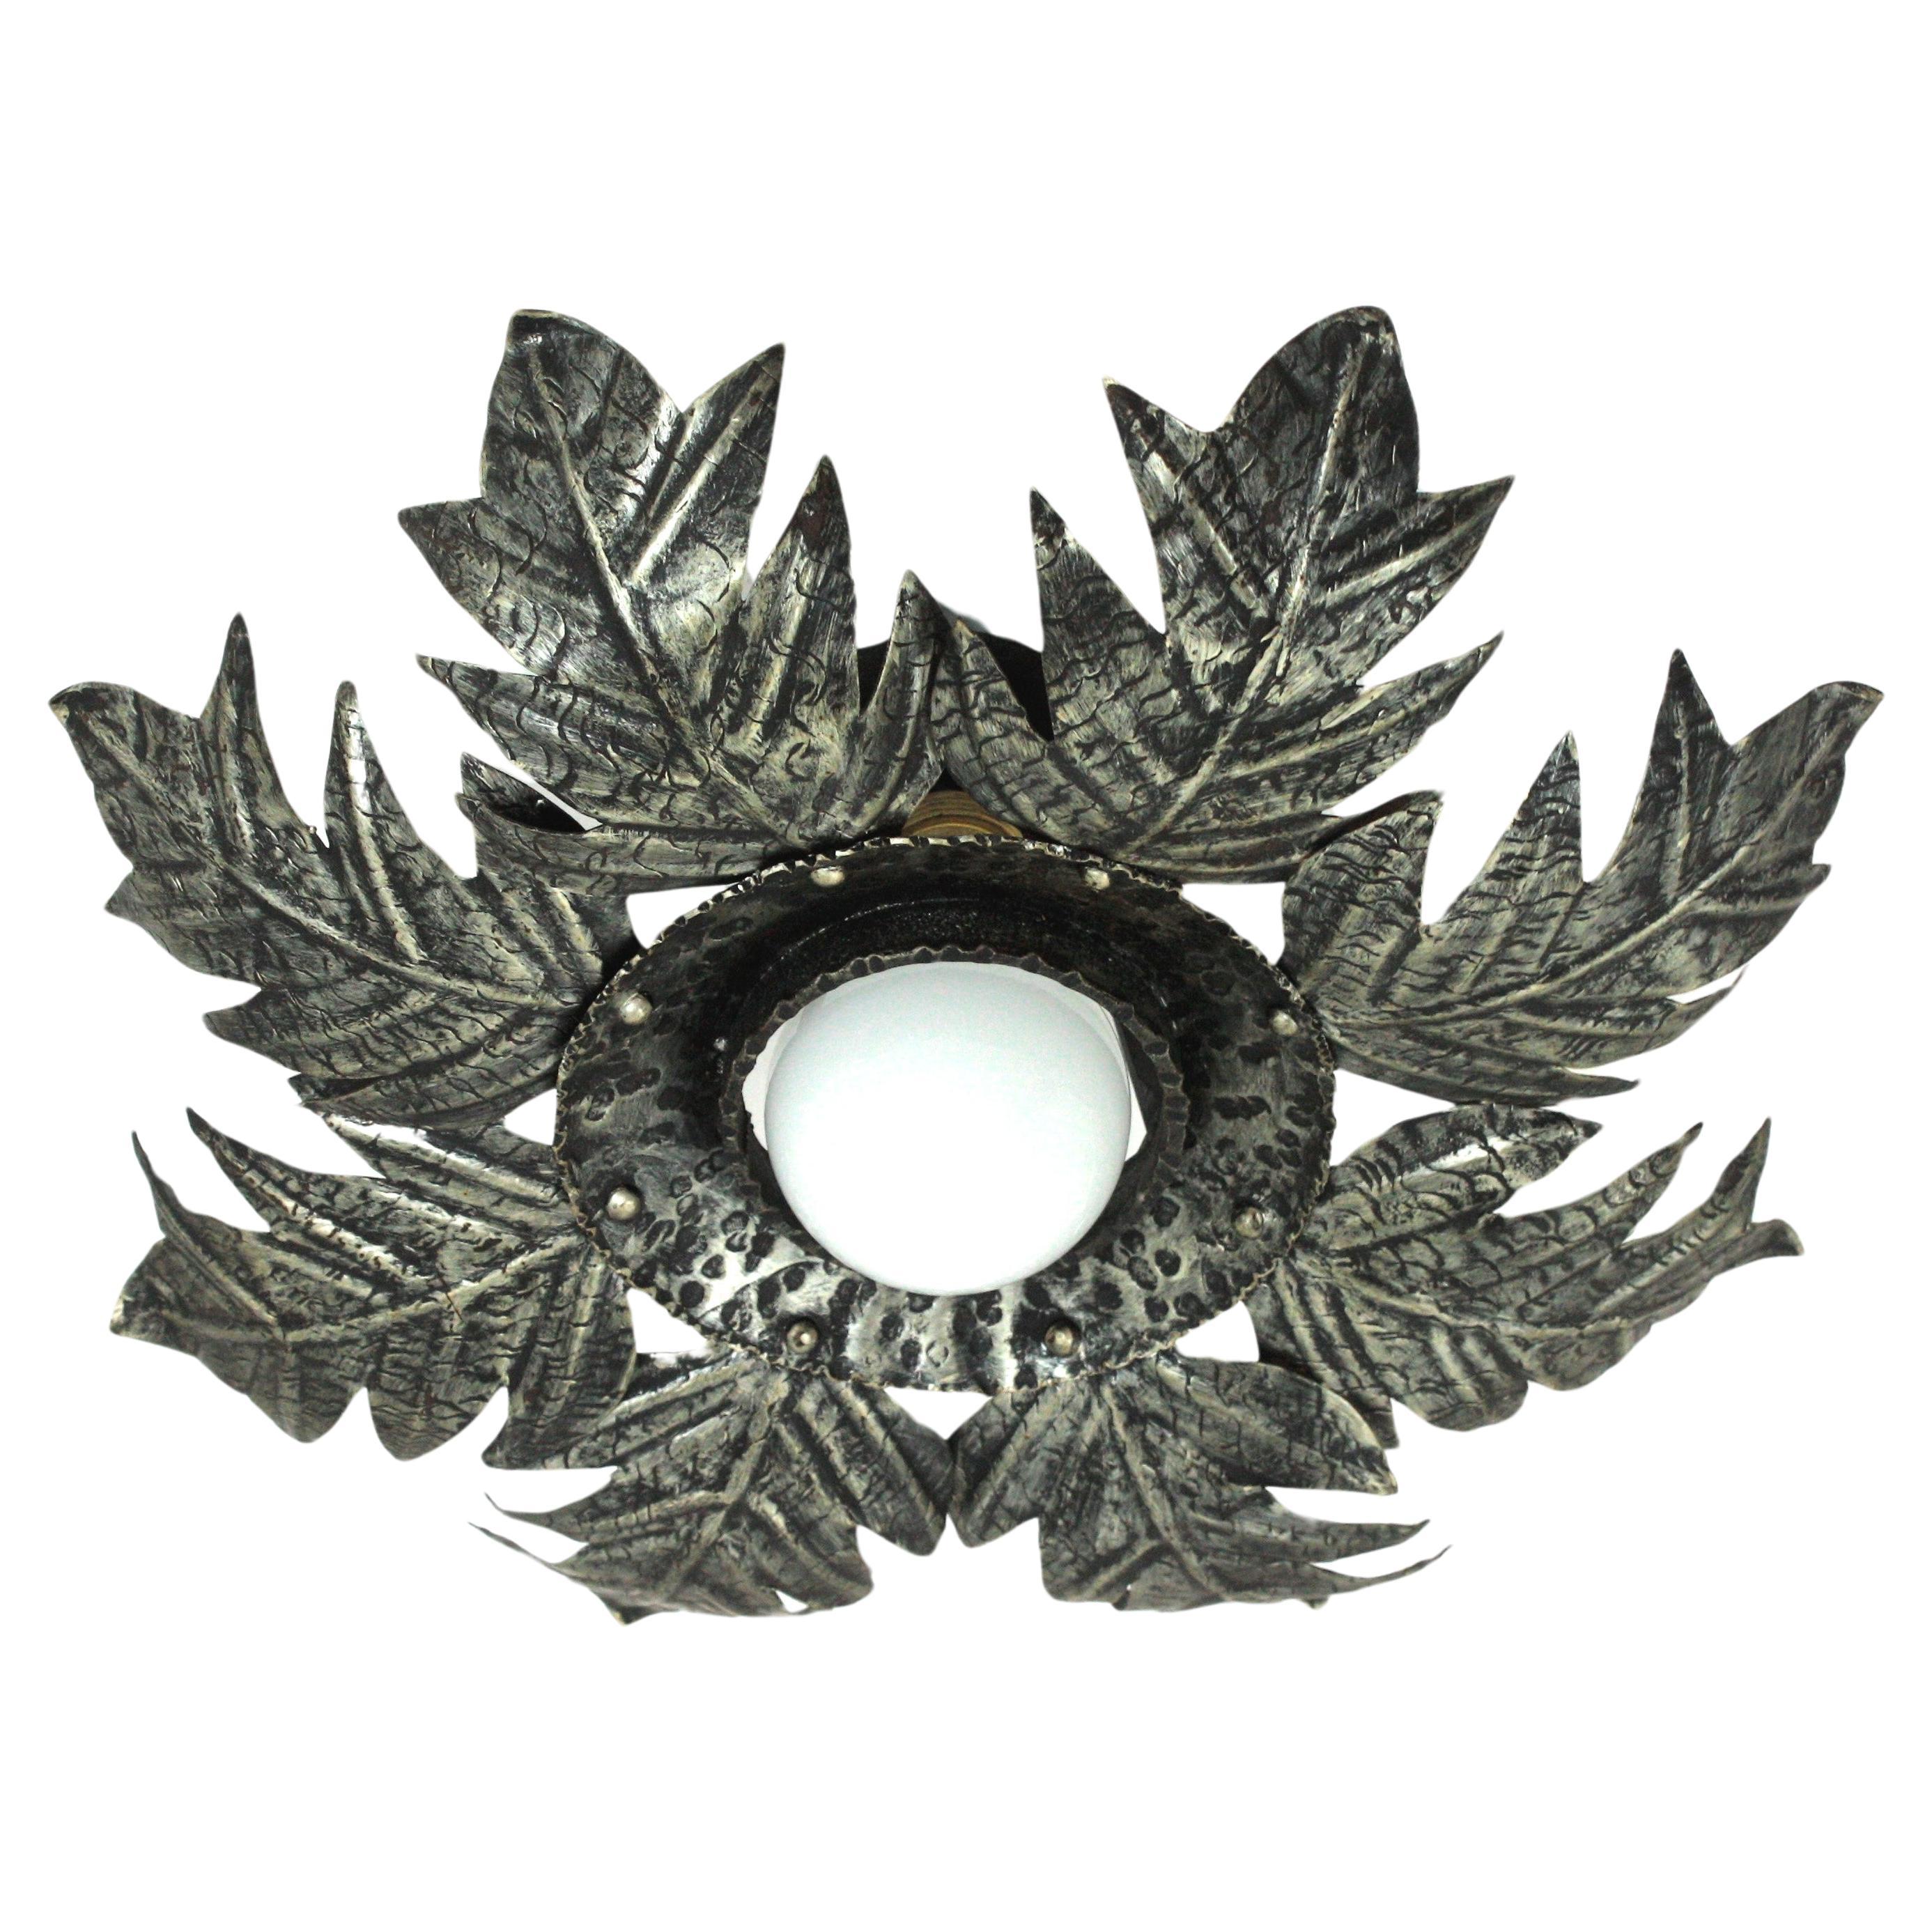 Eye-catching french sunburst leaves flush mount in silvered metal, 1950s.
This leafed sunburst ceiling light fixture has a beautiful construction with large leaves surrounding a central hand-hammered ring with nail accents.
It has a central light,